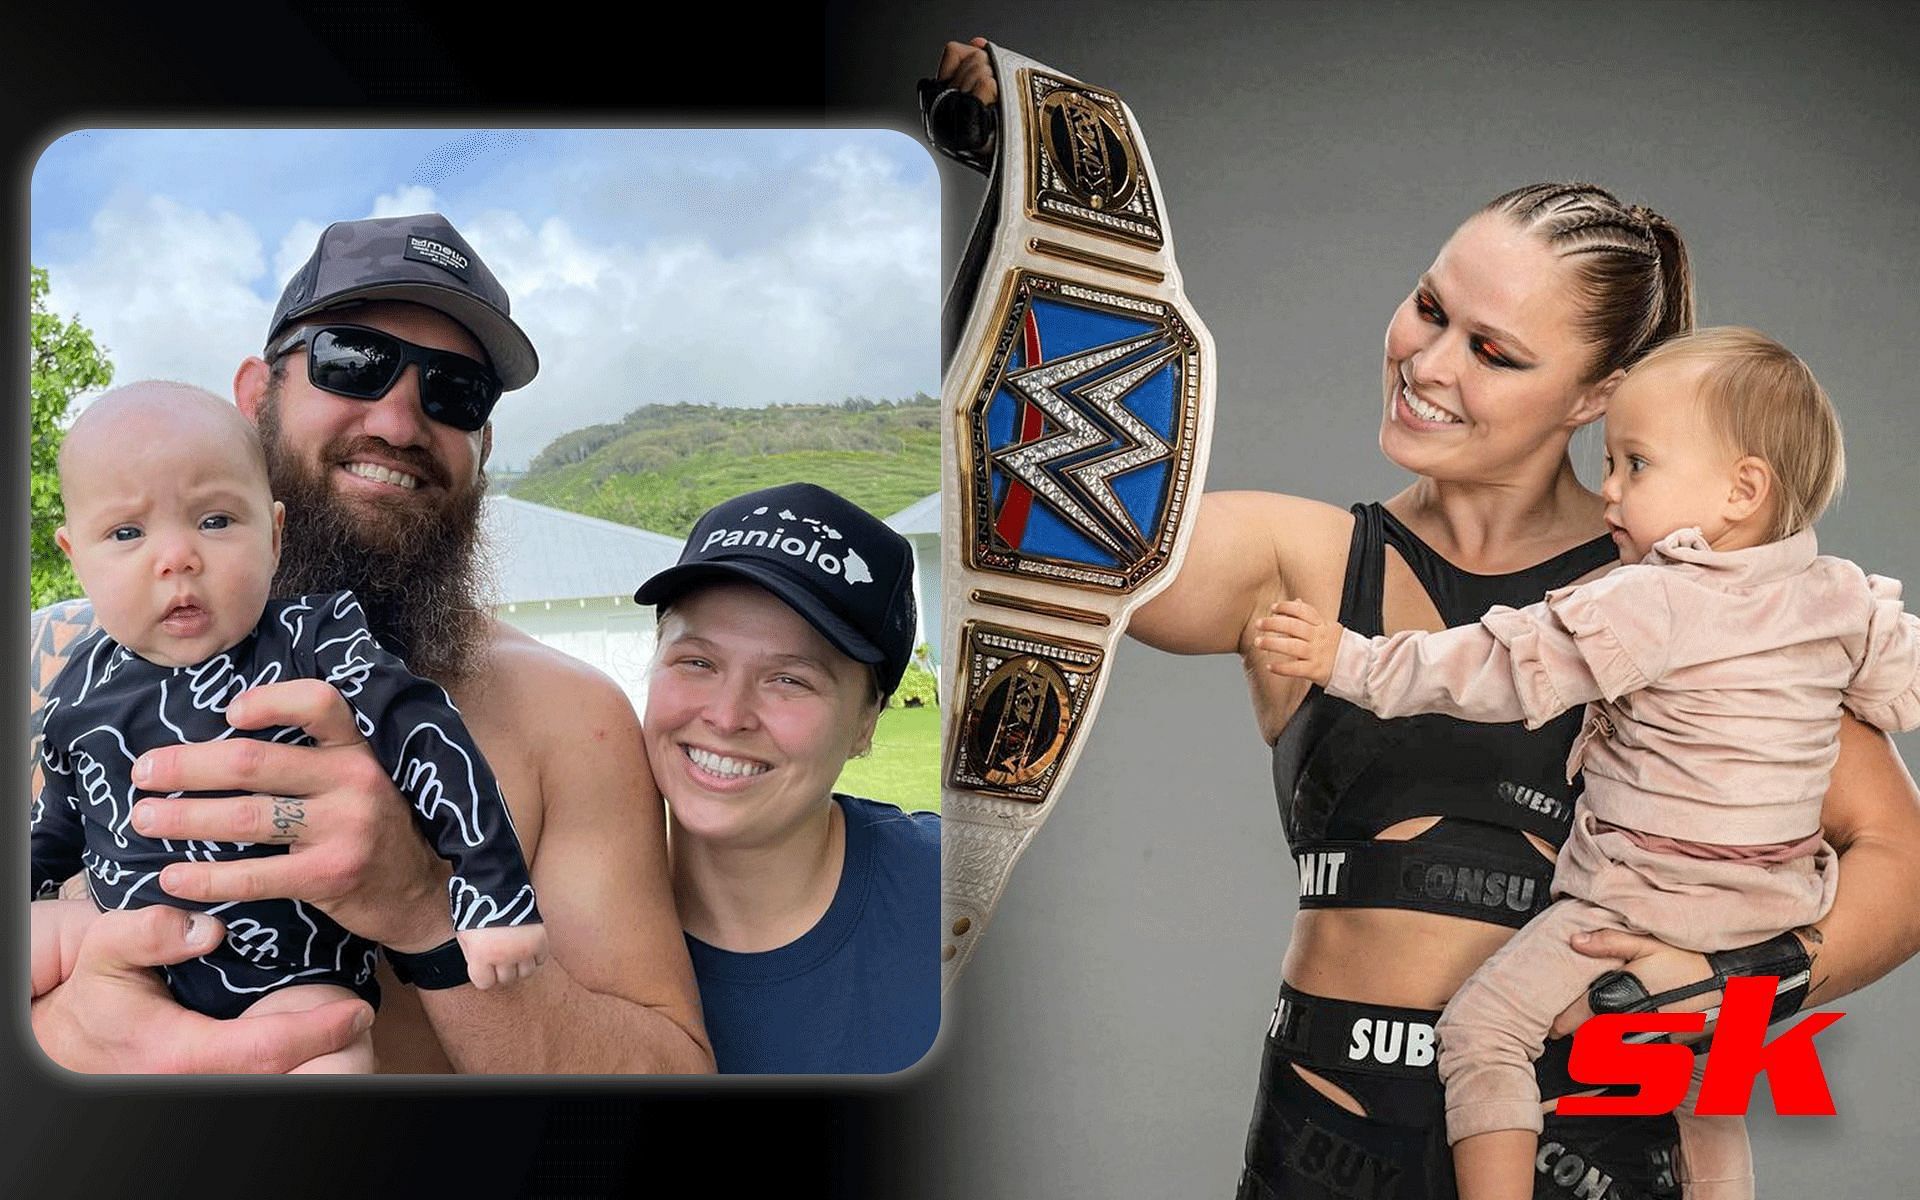 Ronda Rousey UFC return [Images via: @rondarousey and @travisbrownemma on Instagram]